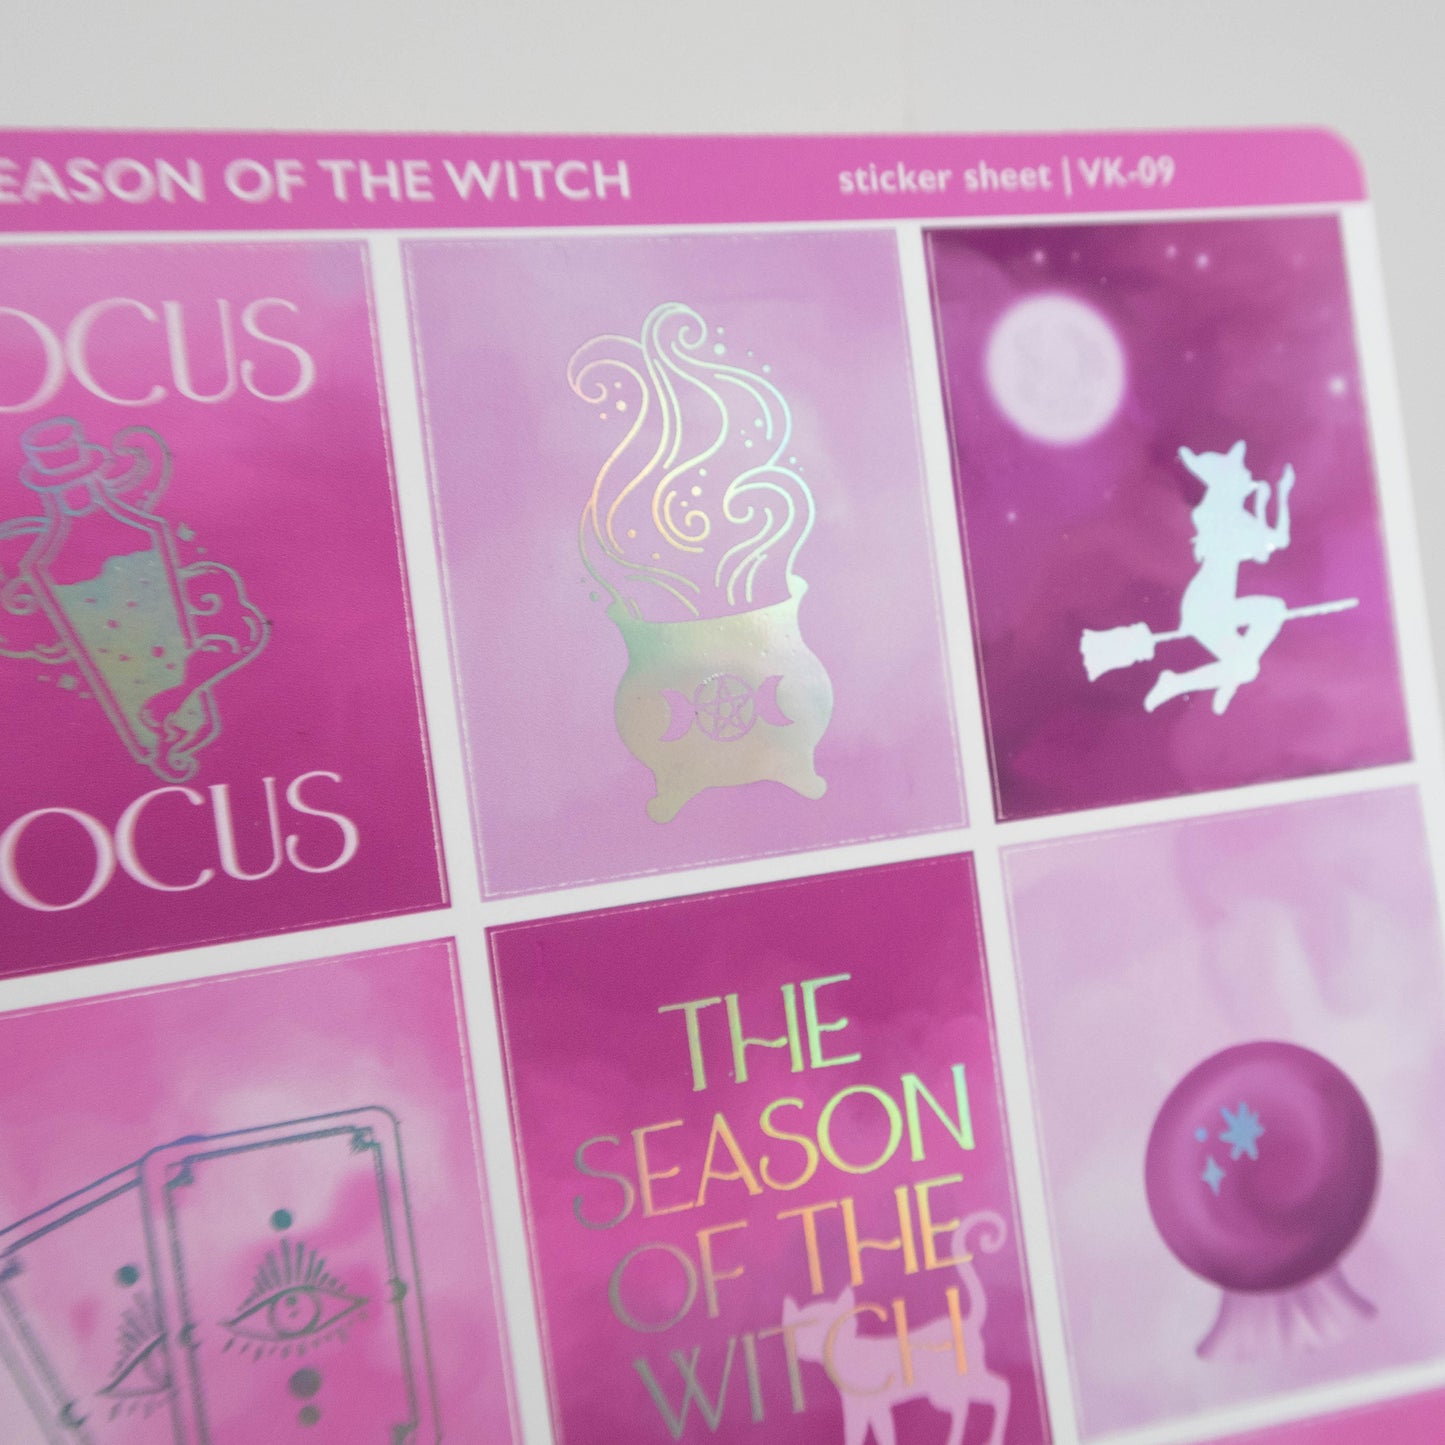 SEASON OF THE WITCH - VERTICAL PLANNER WEEKLY KIT - LIMITED EDITION IRIDESCENT FOIL